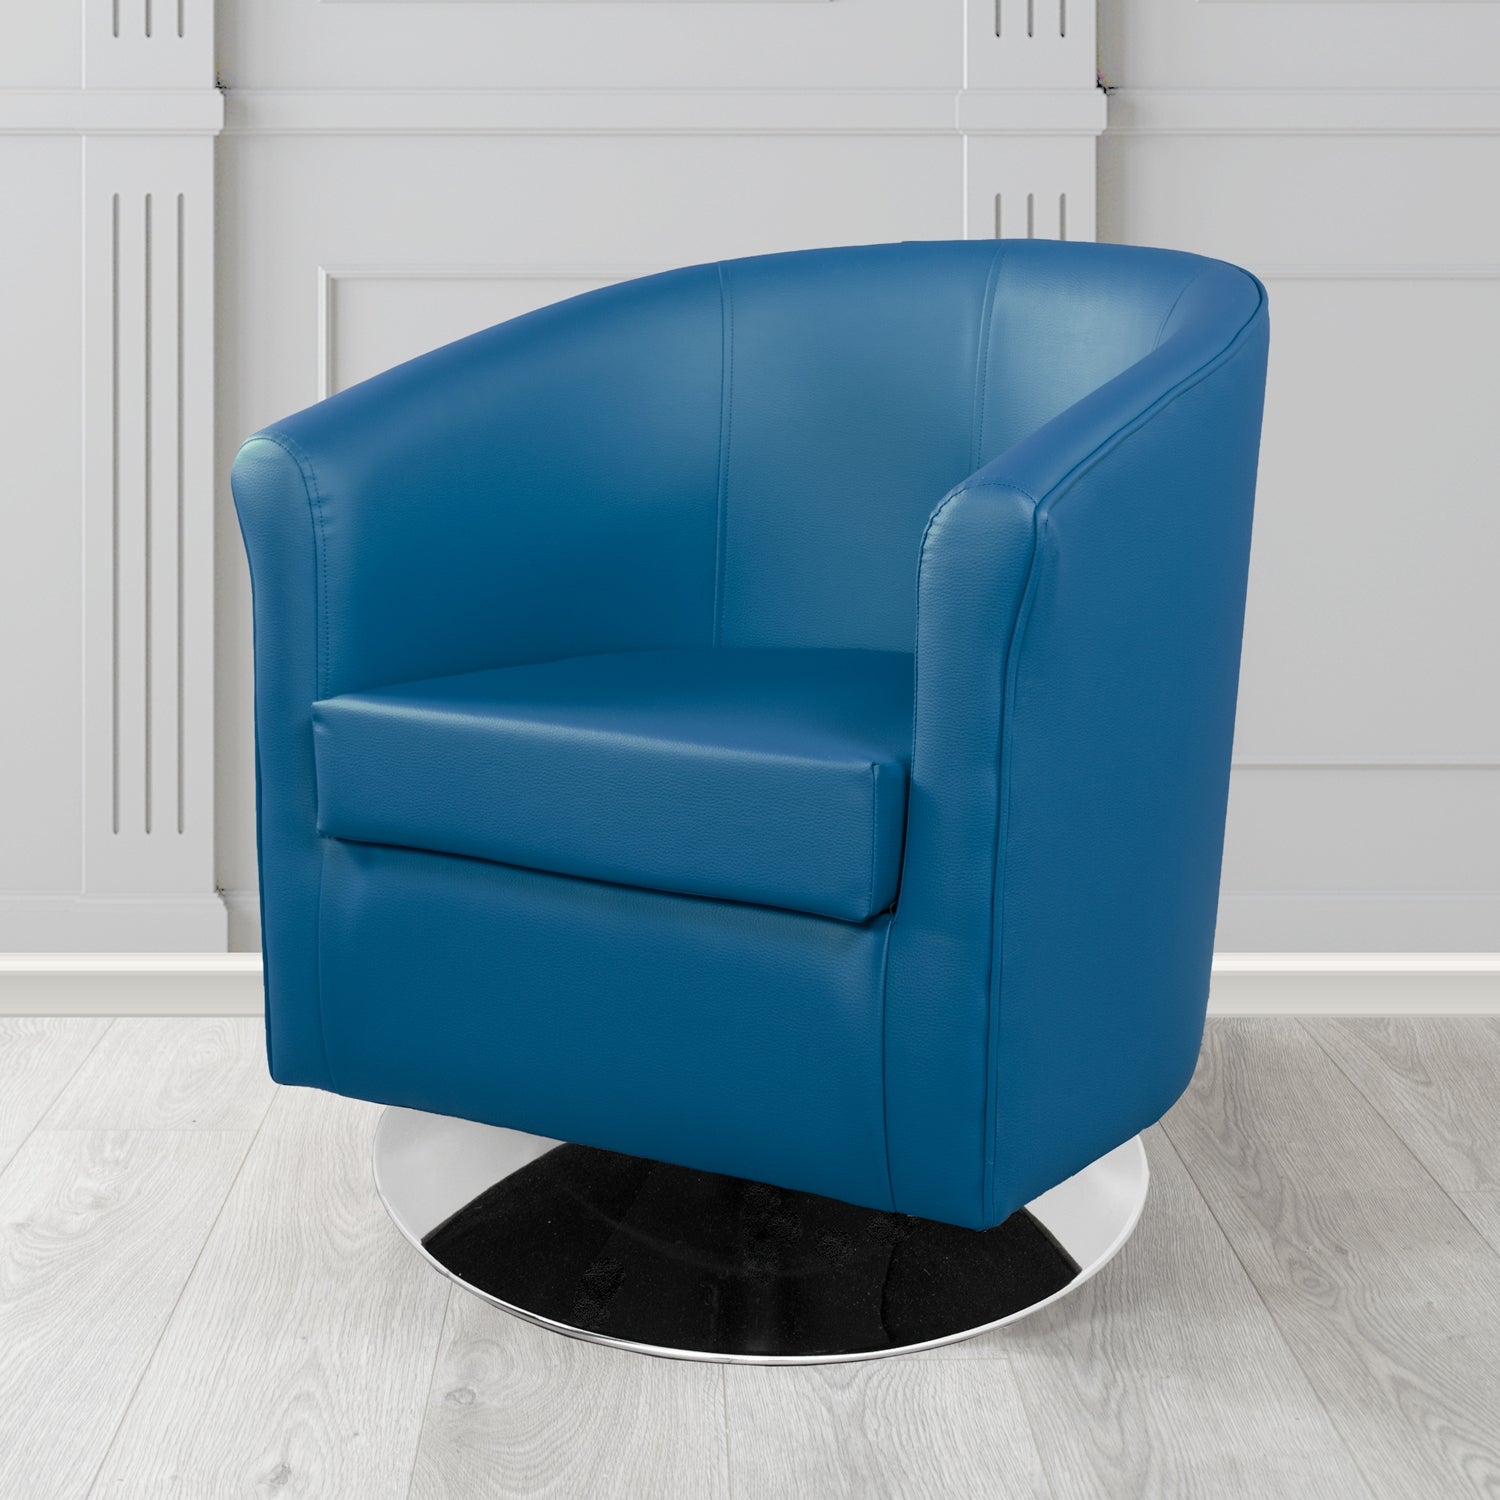 Tuscany Swivel Tub Chair in Madrid Royal Faux Leather - The Tub Chair Shop